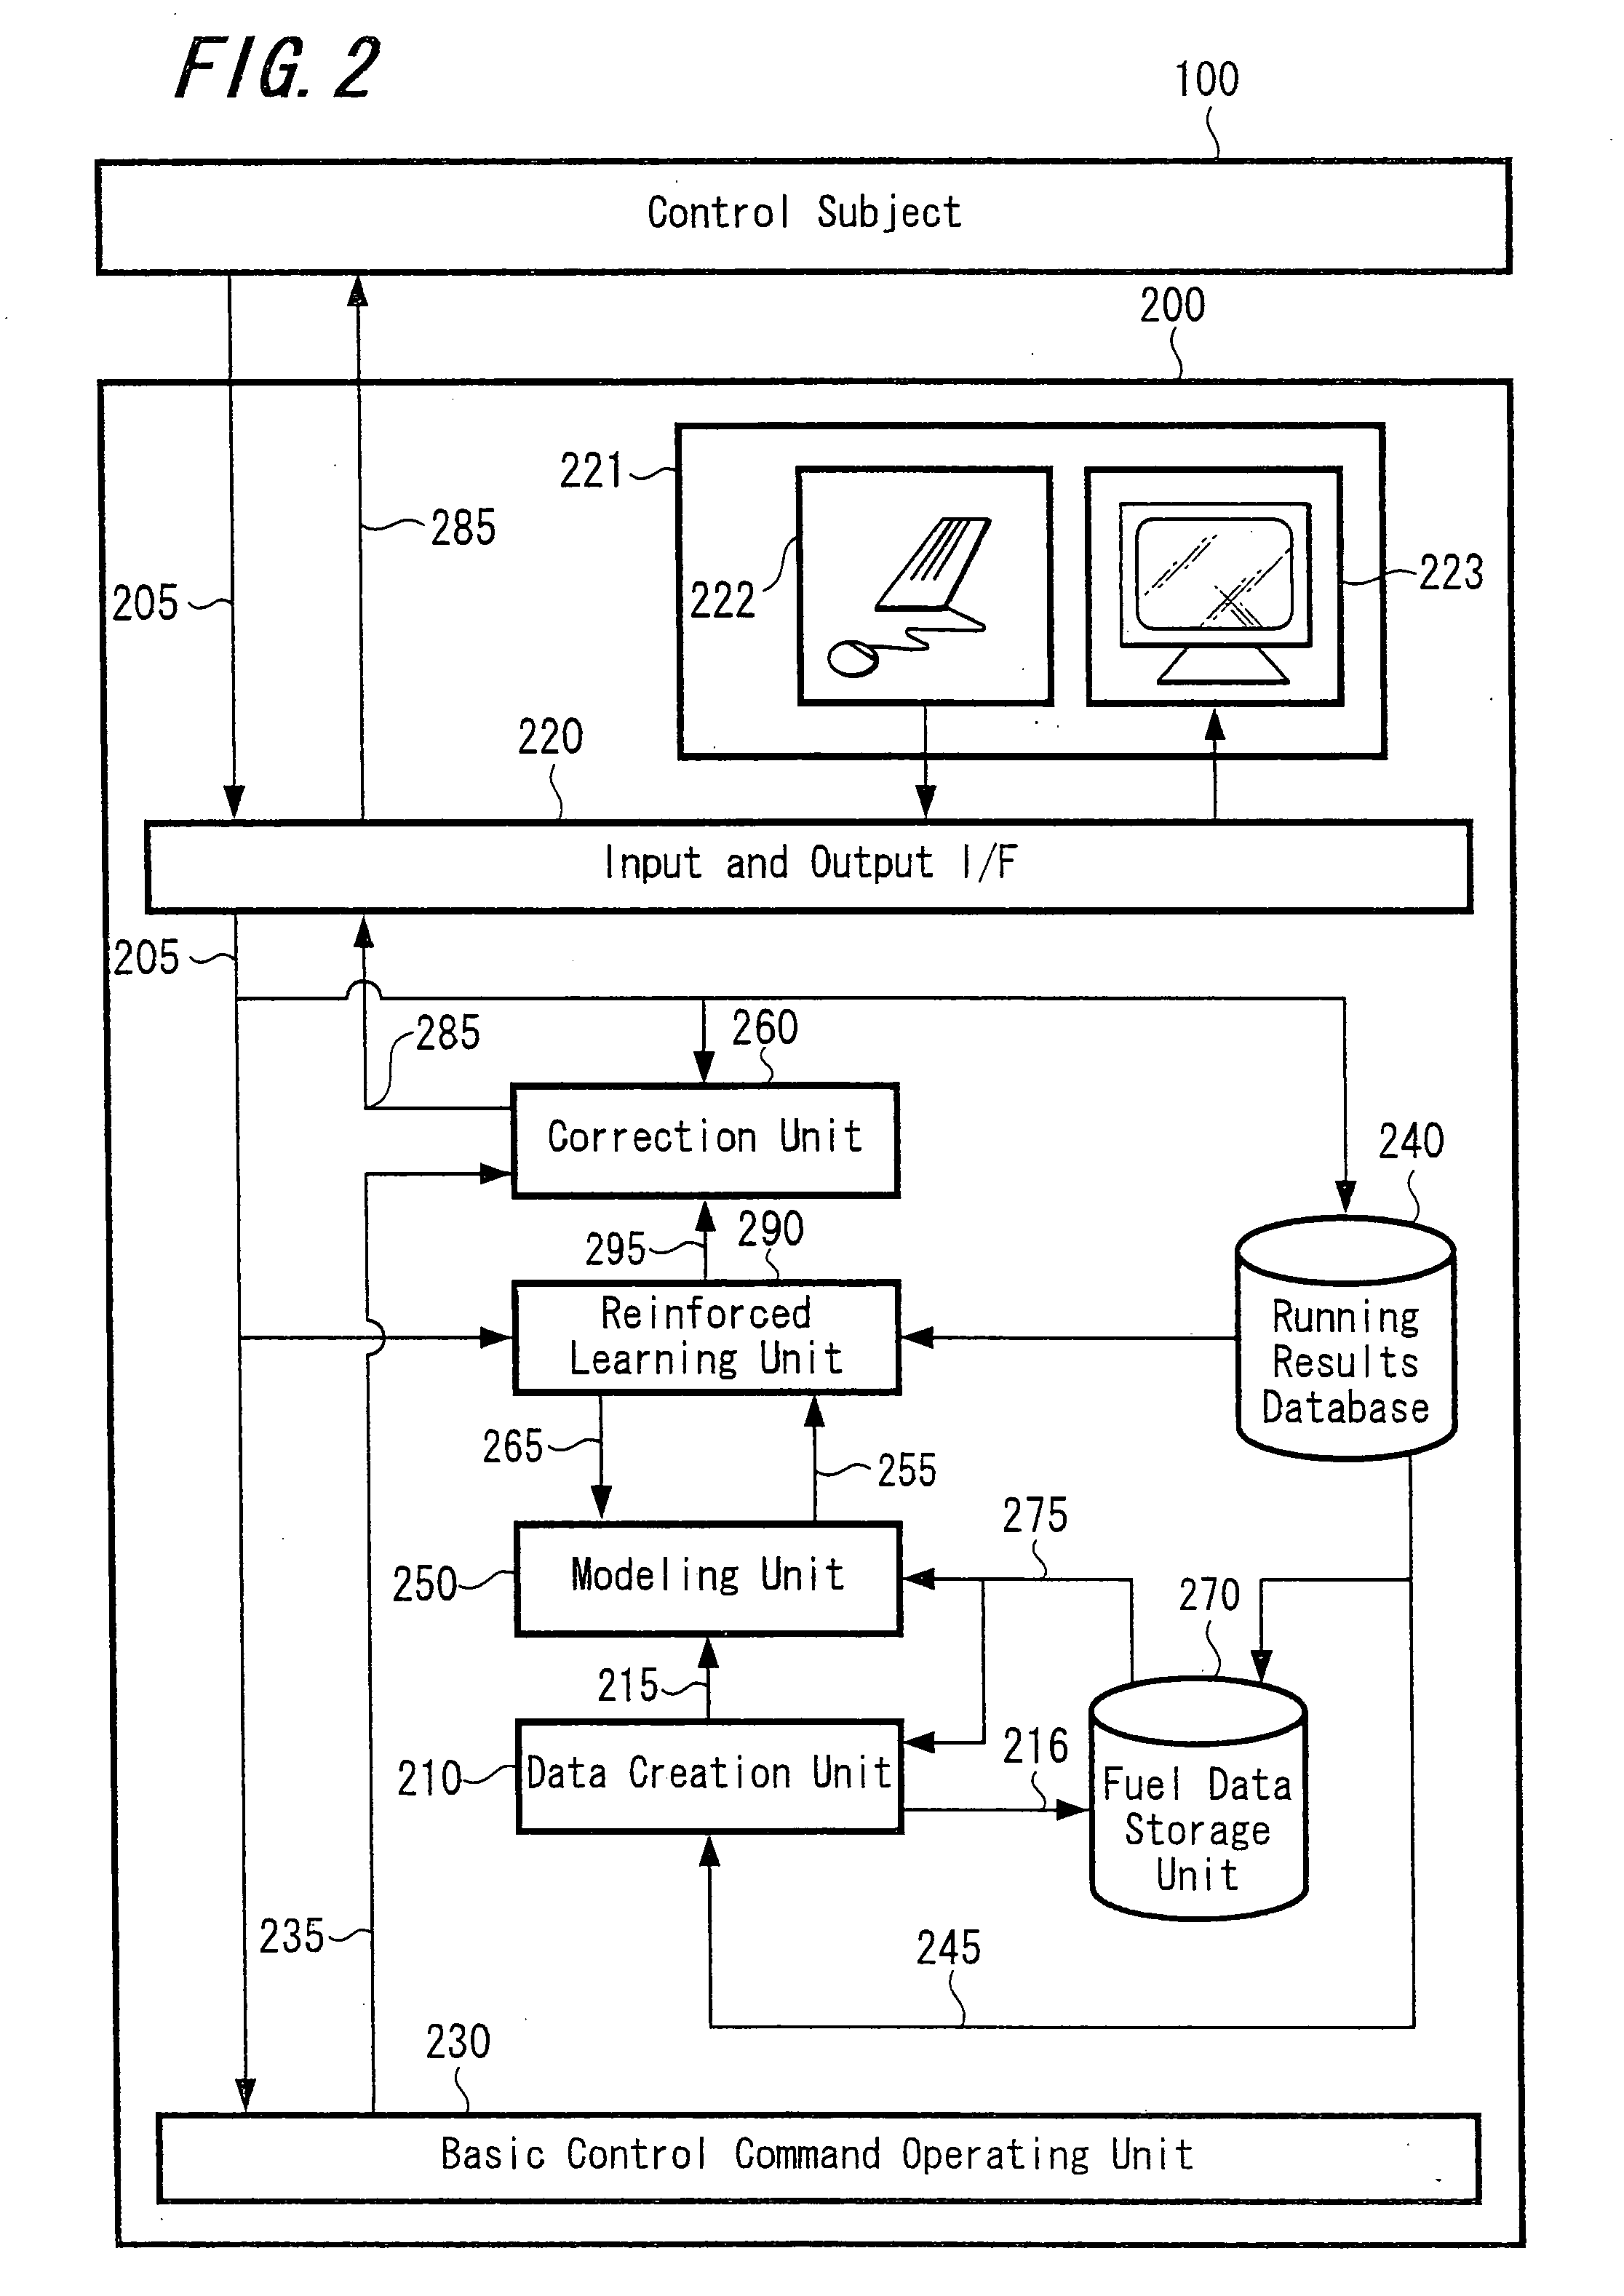 Control system for control subject having combustion unit and control system for plant having boiler